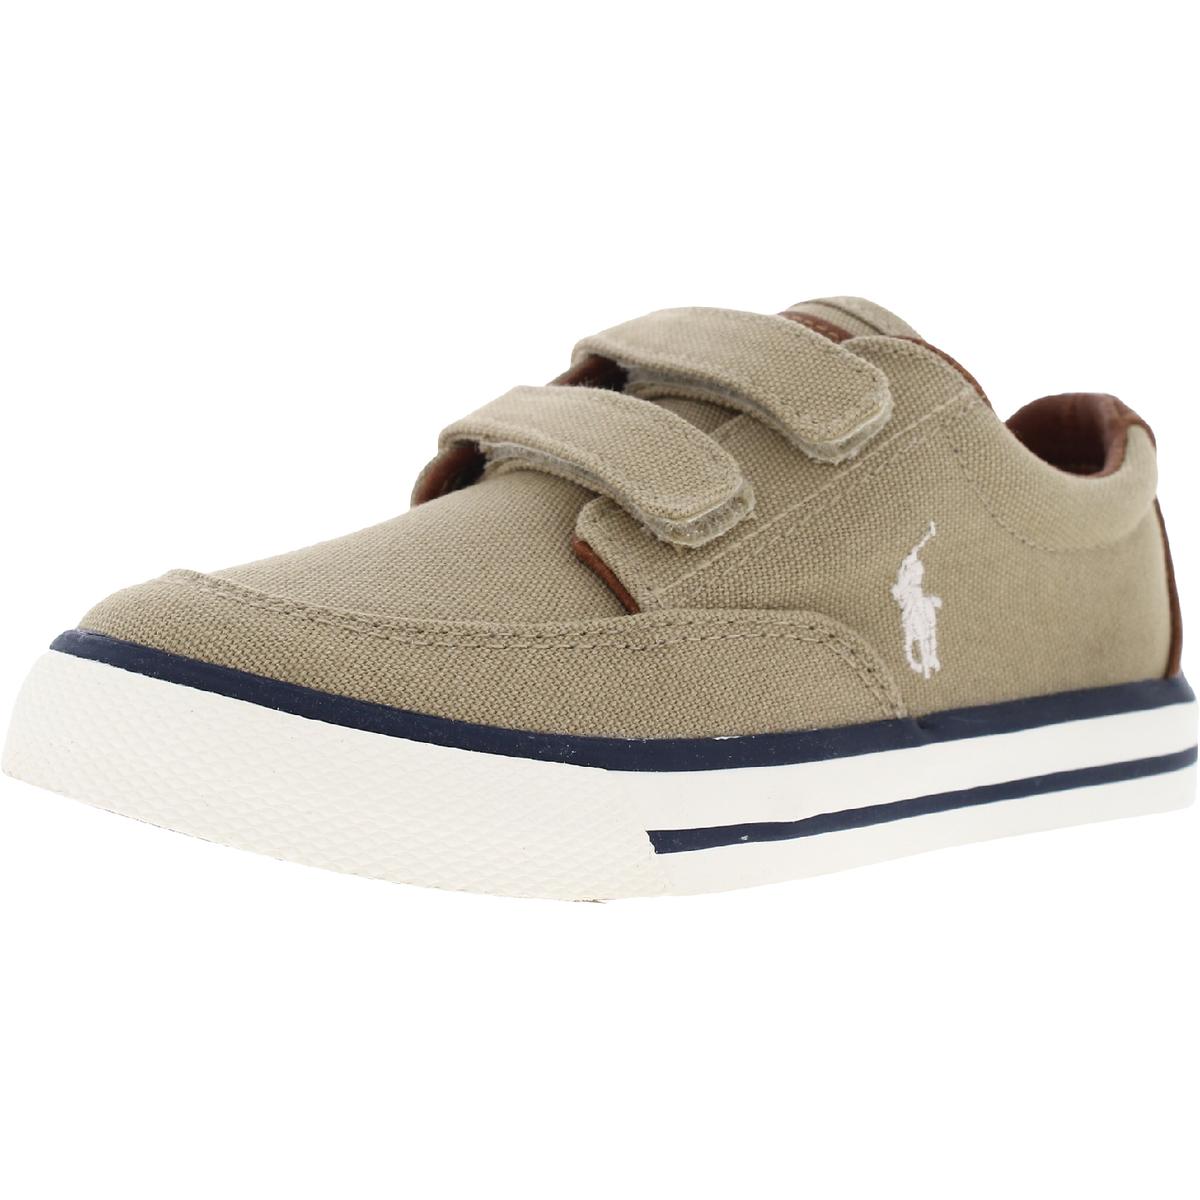 Ralph Lauren Layton Boys Toddler Casual Casual and Fashion Sneakers